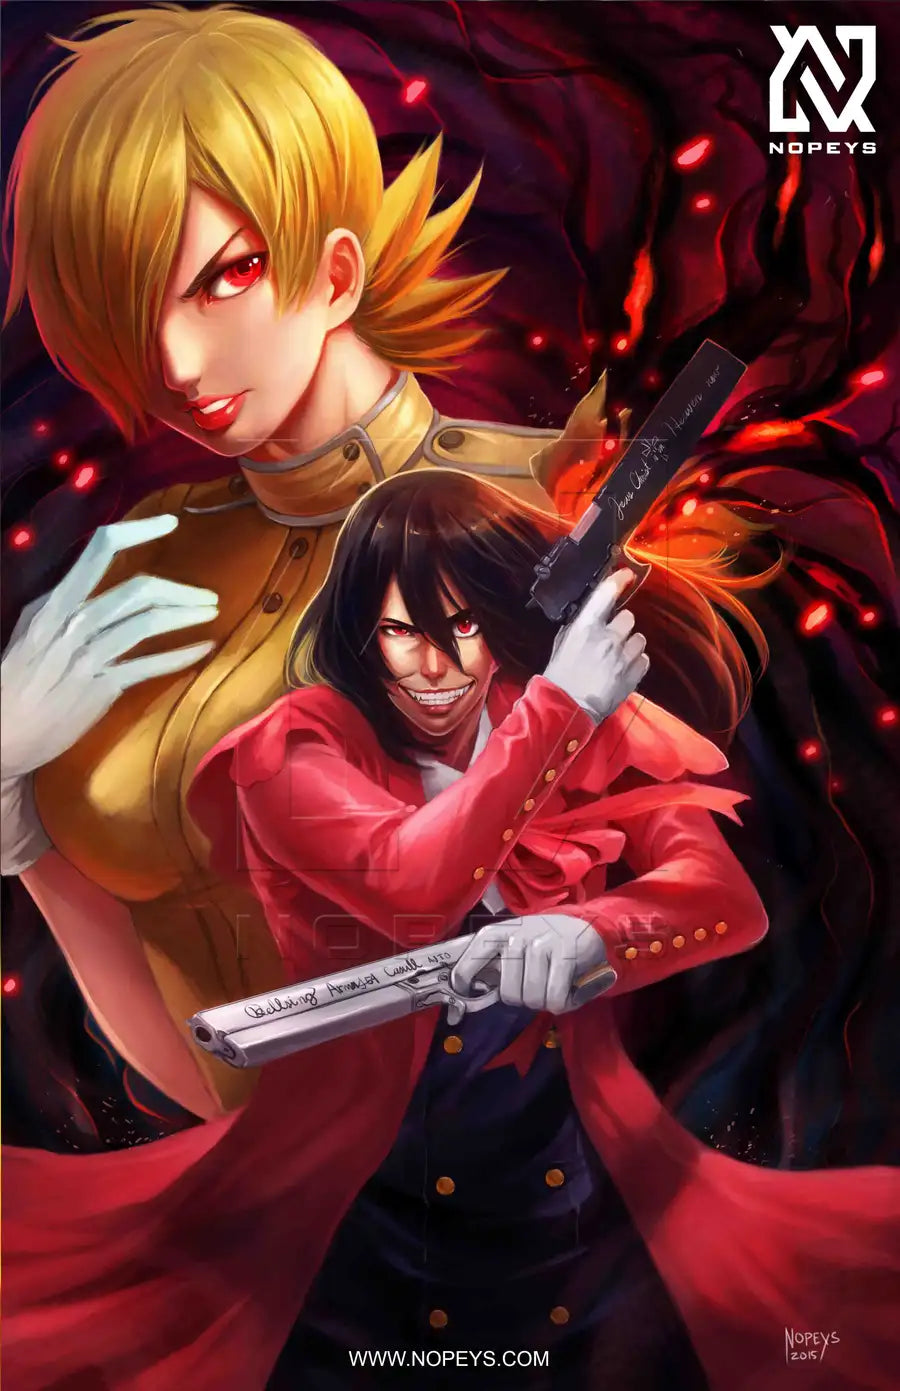 Hellsing Alucard, a card pack by Gothik Angelica - INPRNT